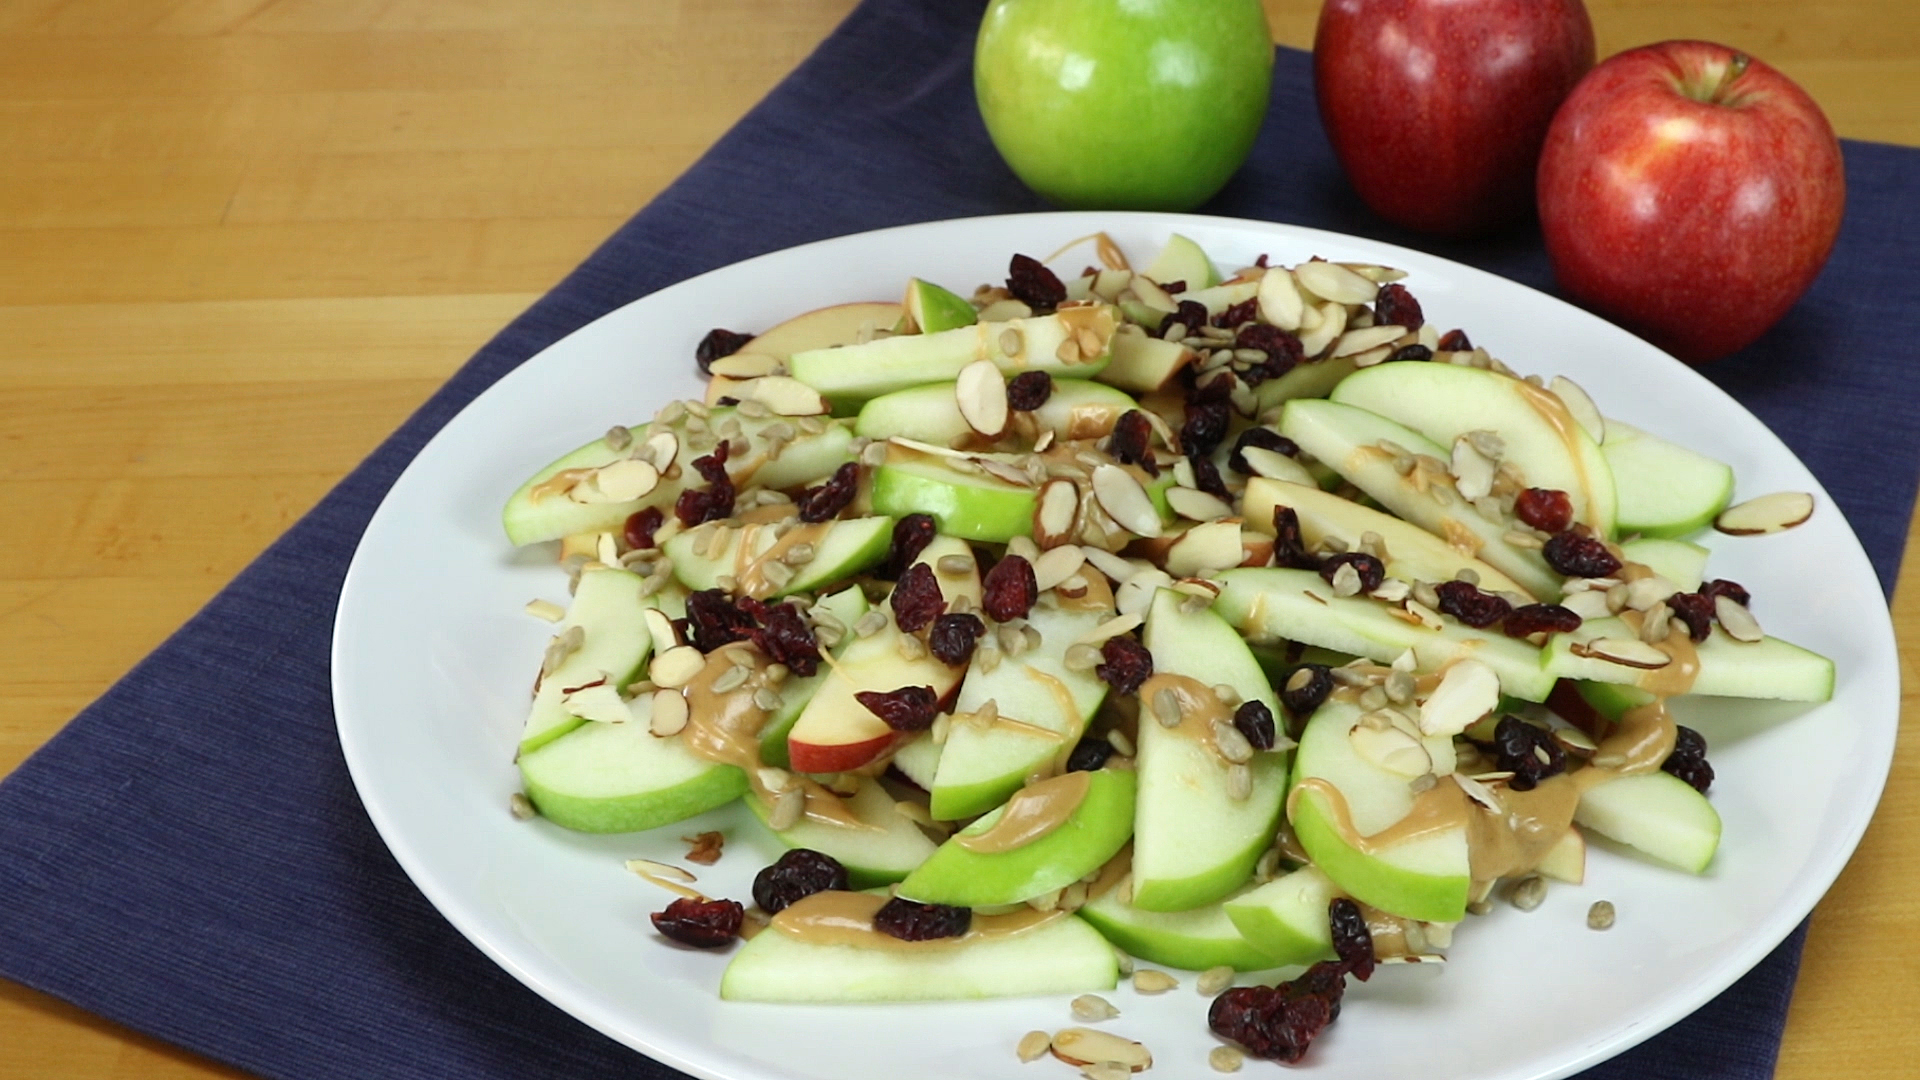 Use your favorite apples to make this tasty recipe. (Photo courtesy of American Heart Association)